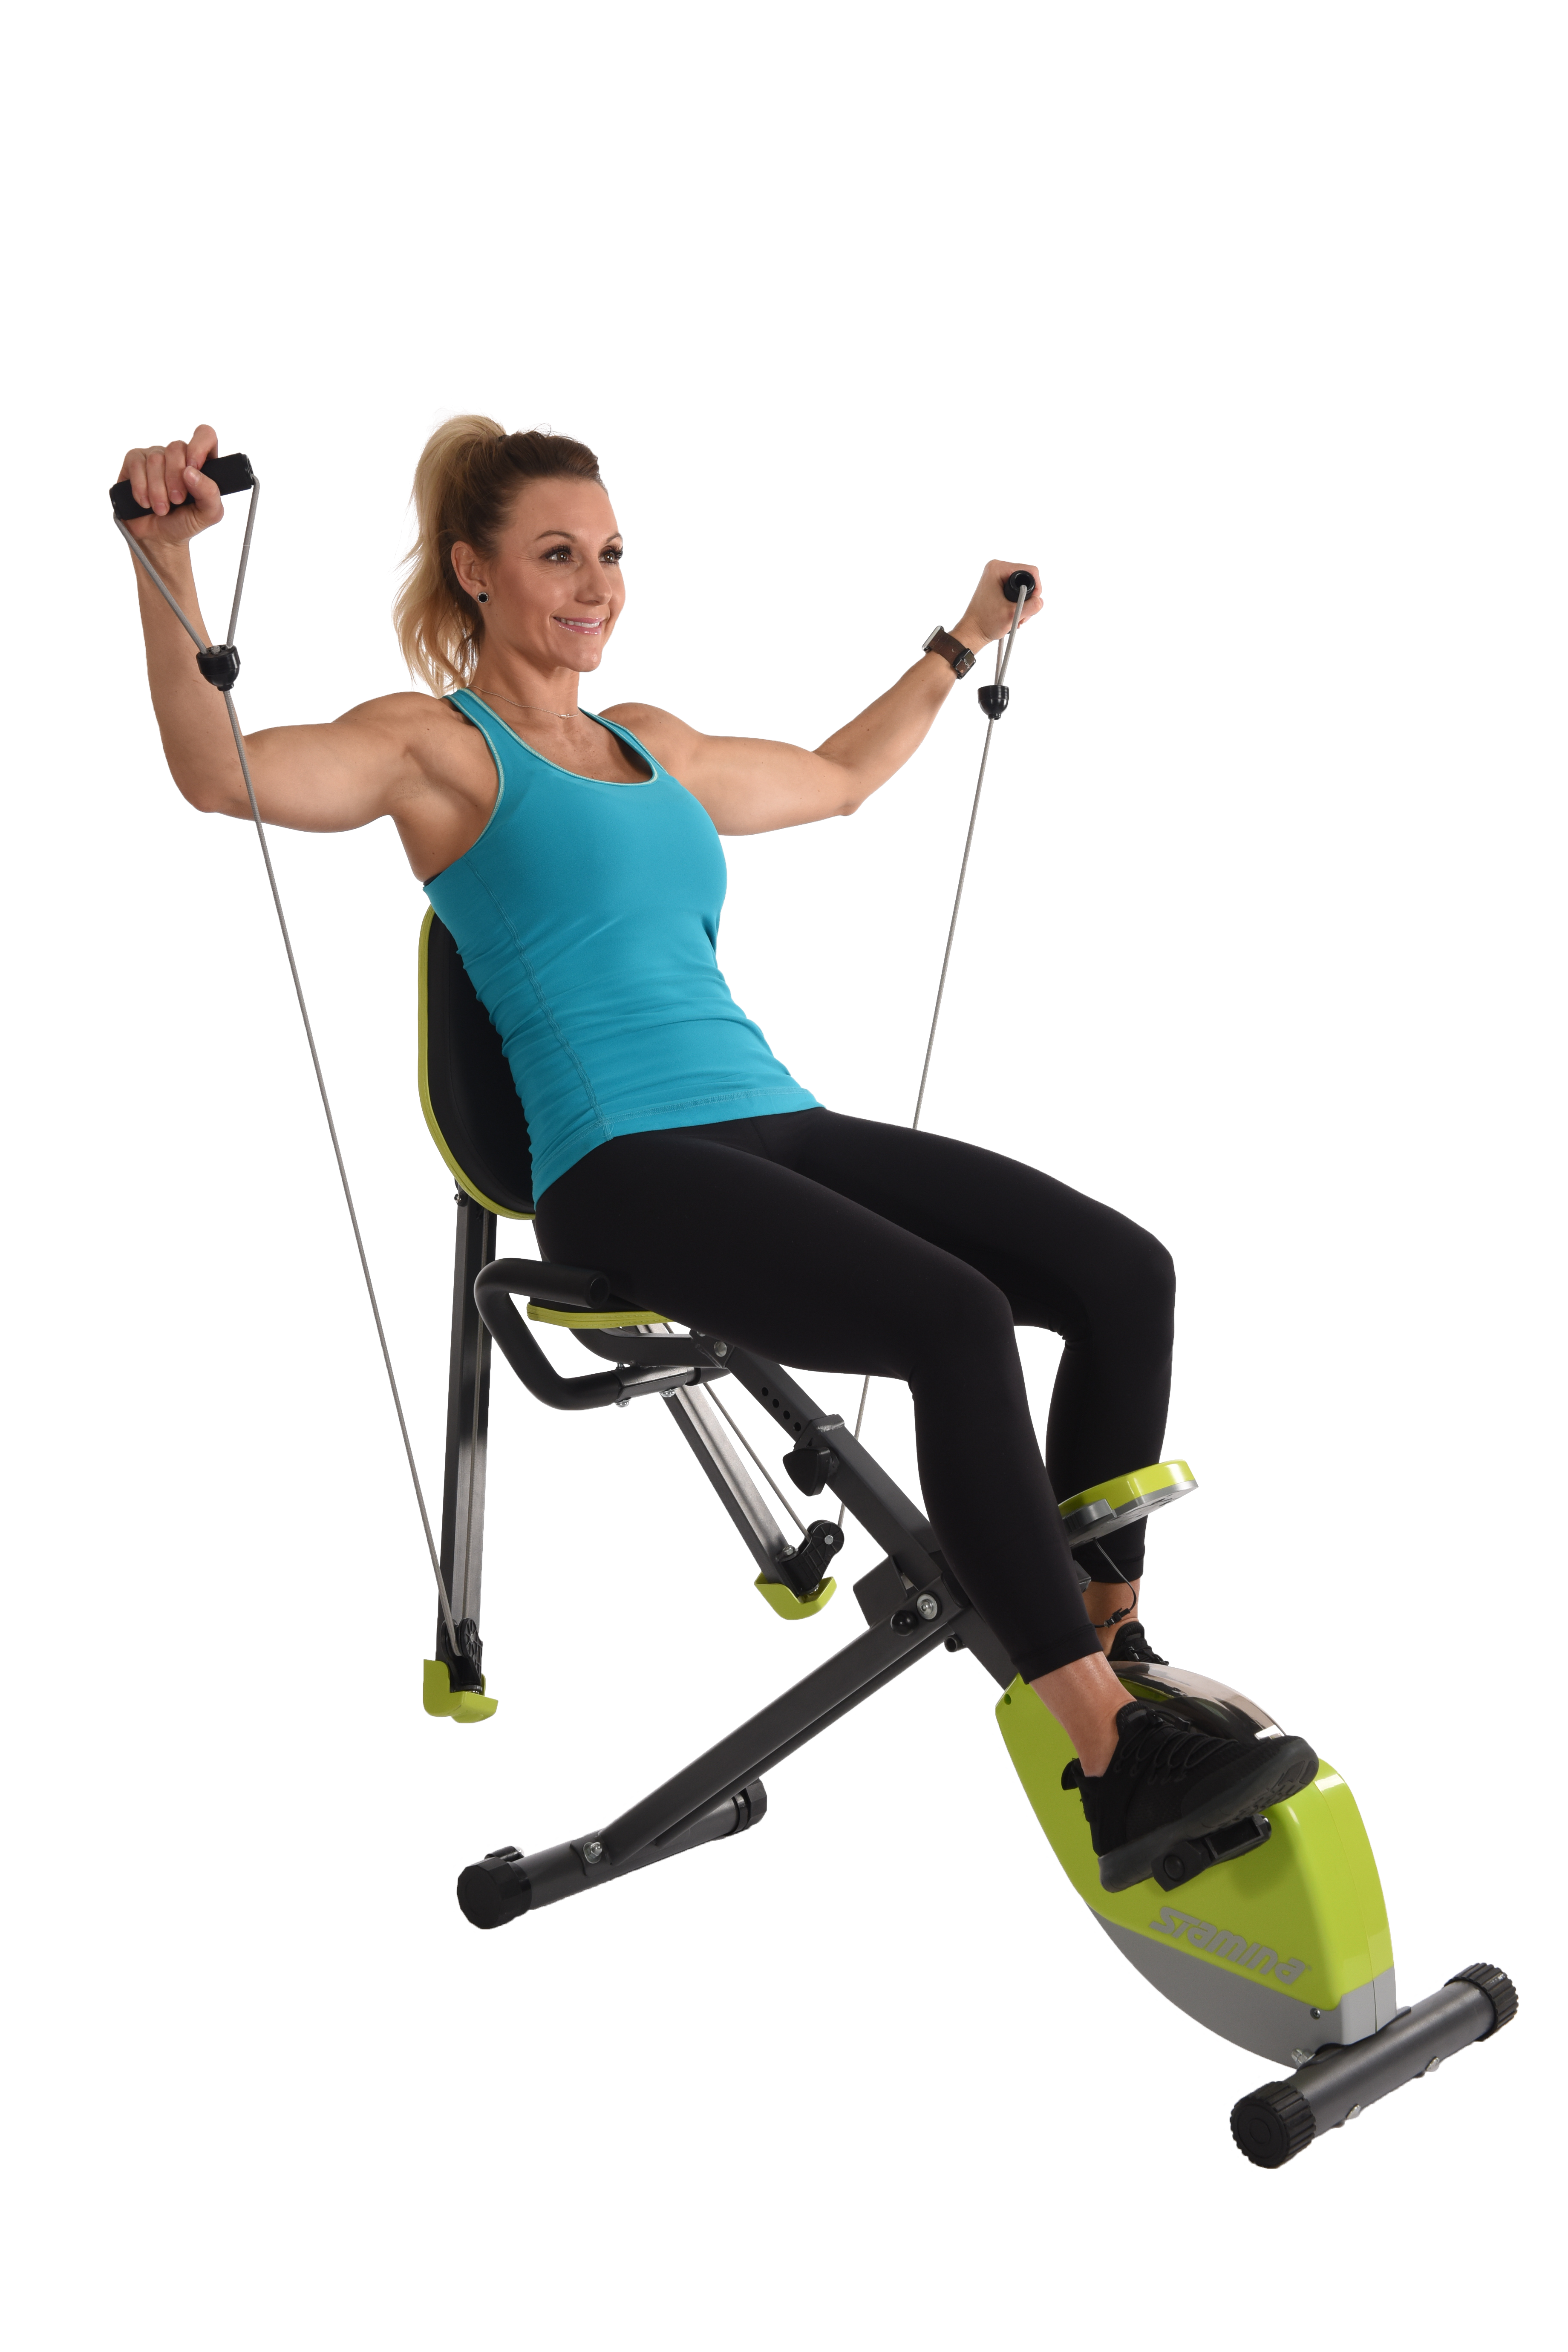 Performing seated latiral raises on Stamina Wonder Exercise Bike With Strength System.